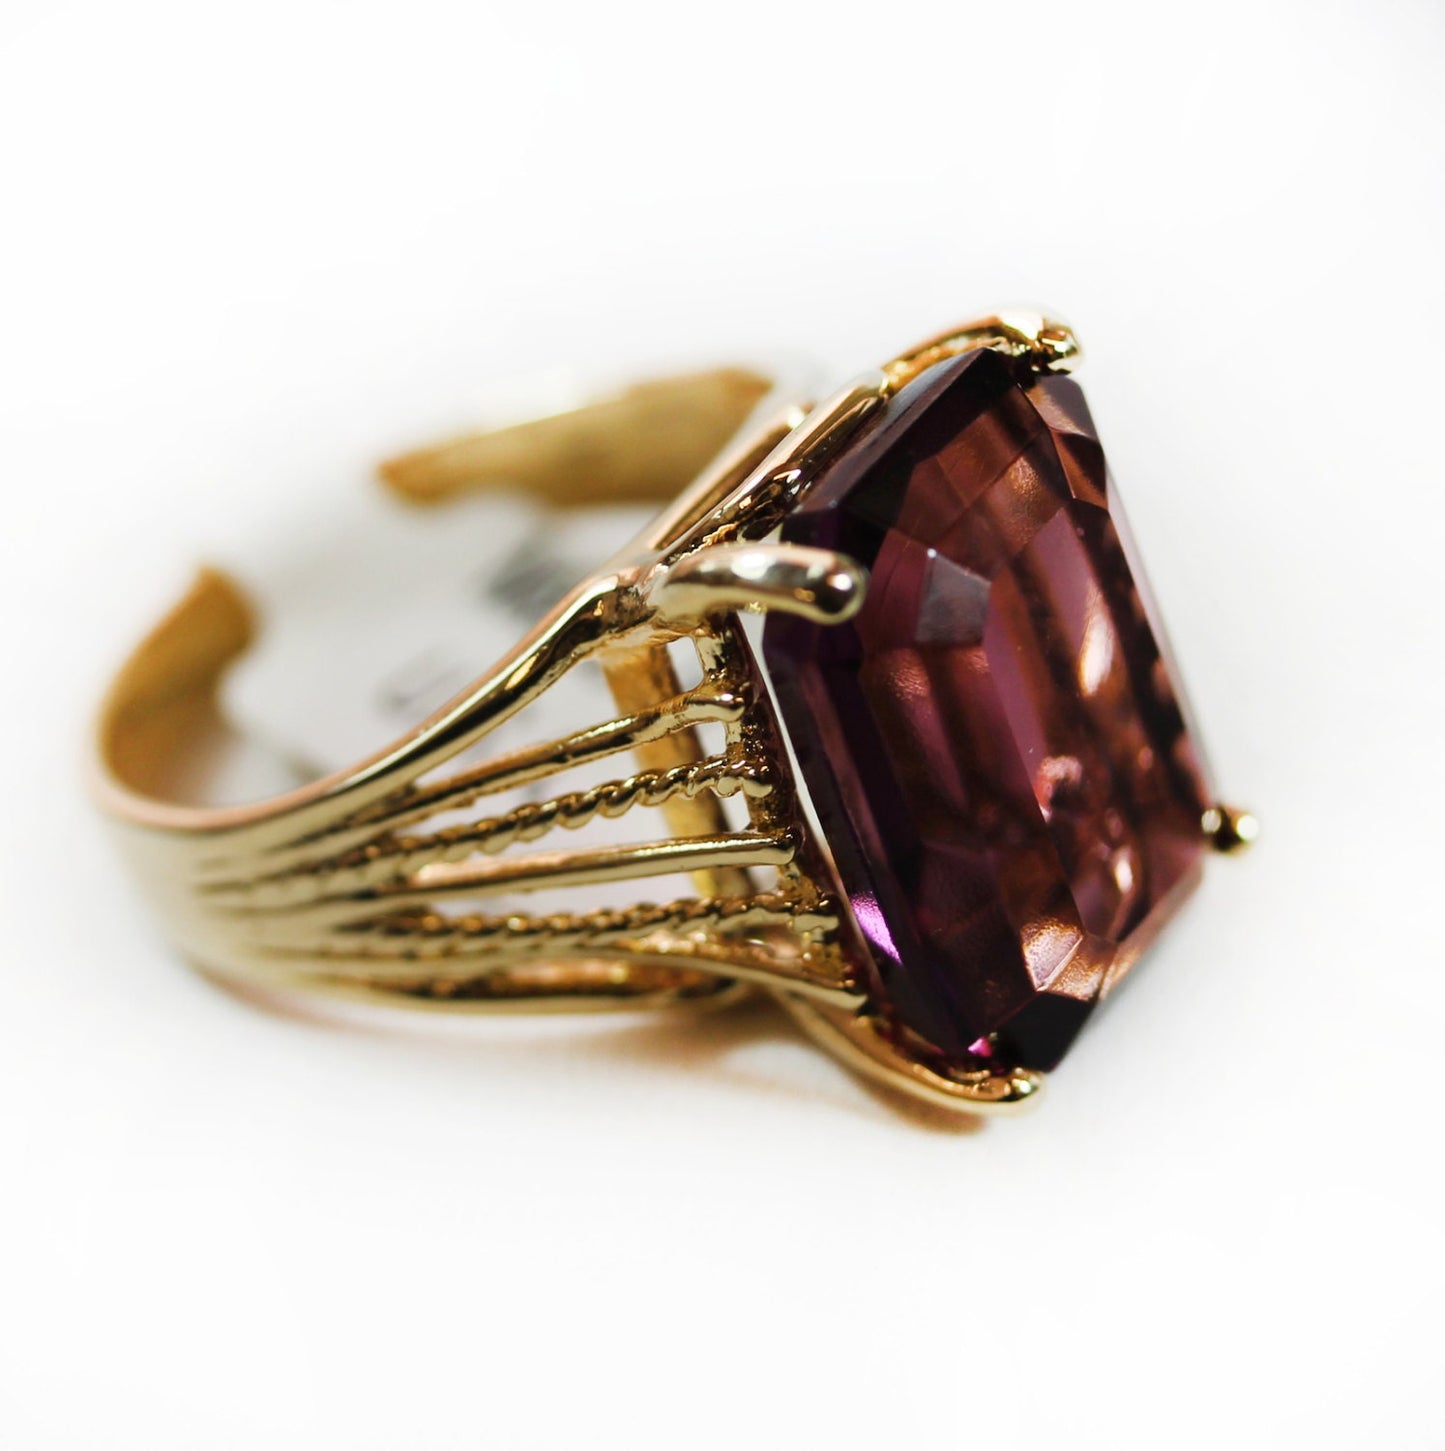 Vintage Ring 1970s Ruby Austrian Crystal 18k Gold Cocktail Ring #R694